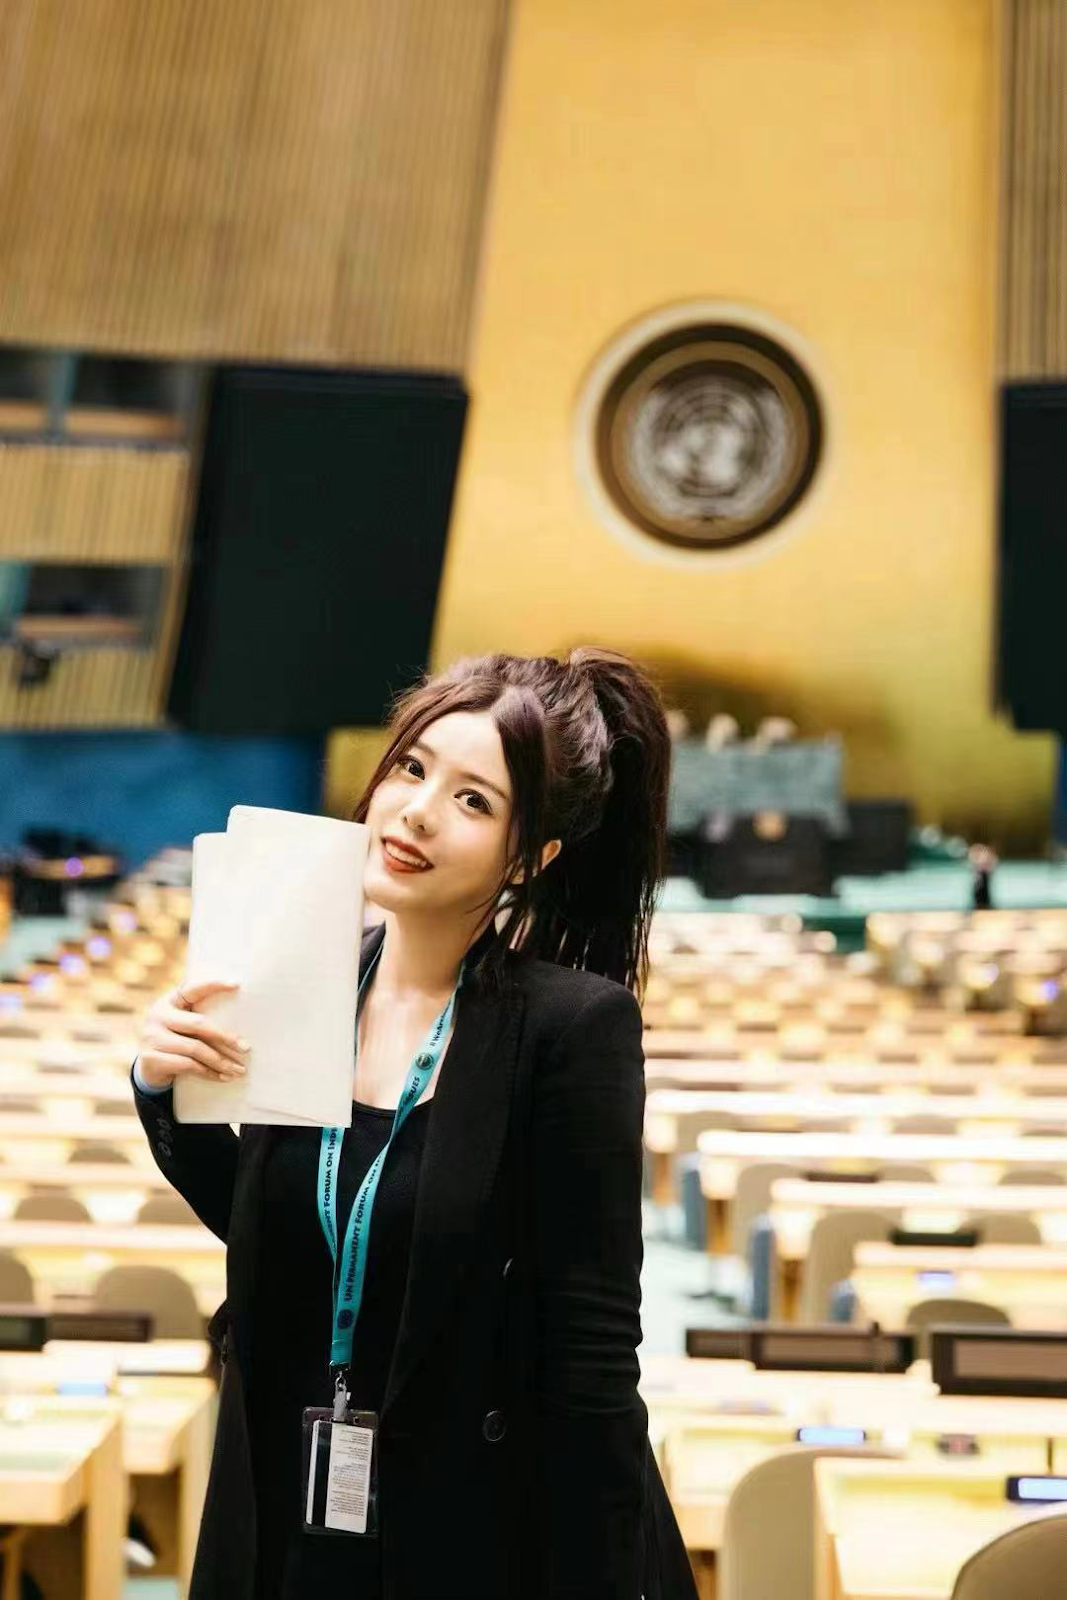 Li Siya’s self-confidence speech on Chinese culture at the United Nations Youth Forum caused an international sensation